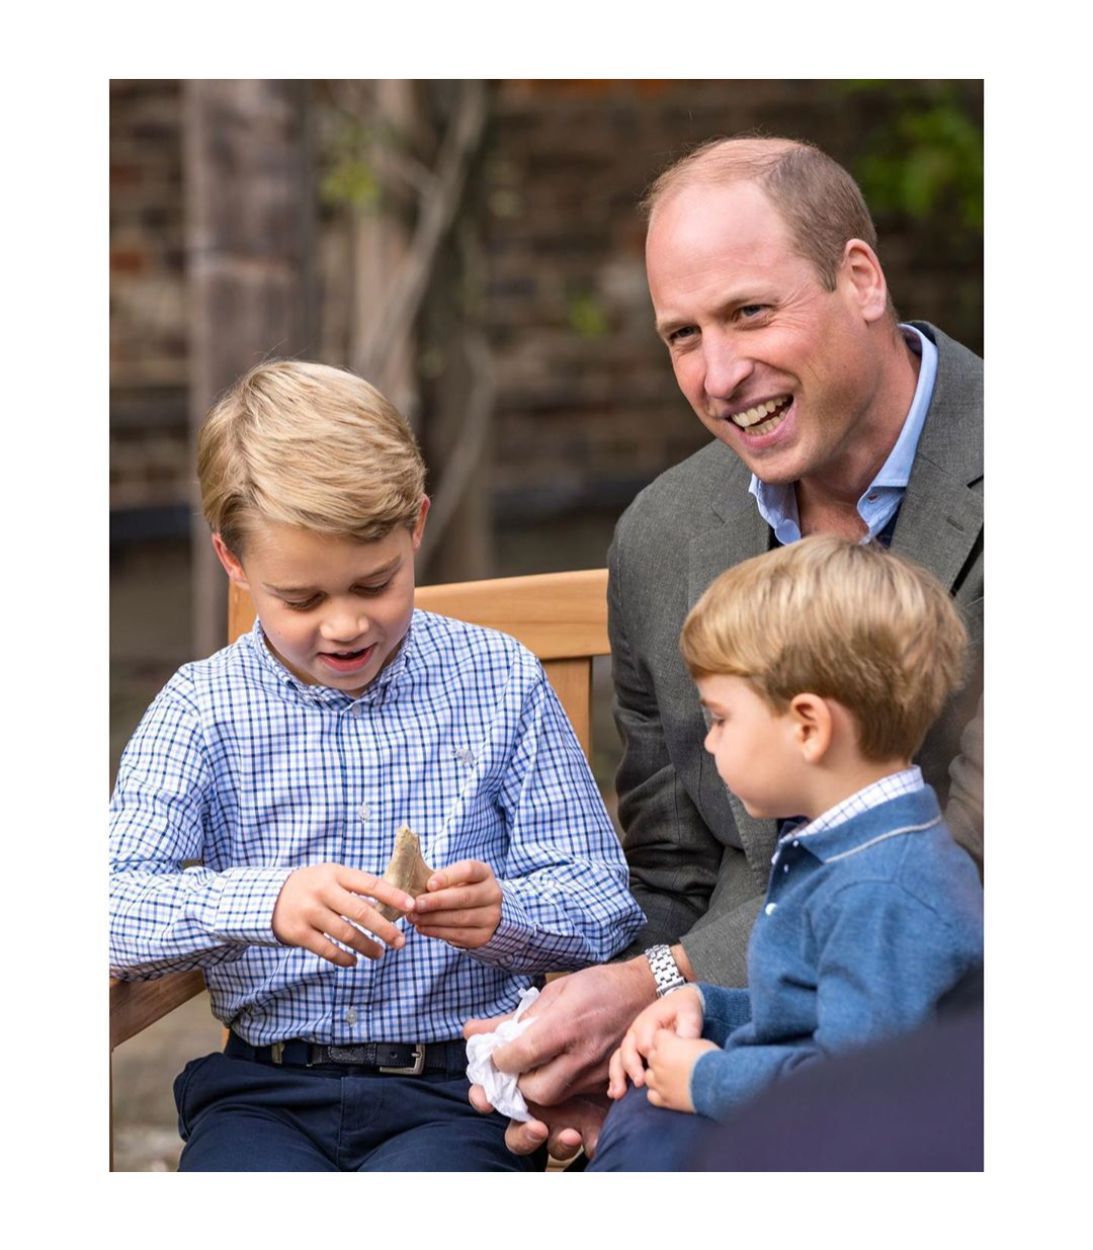 Prince William smiling with Prince George and Prince Louis